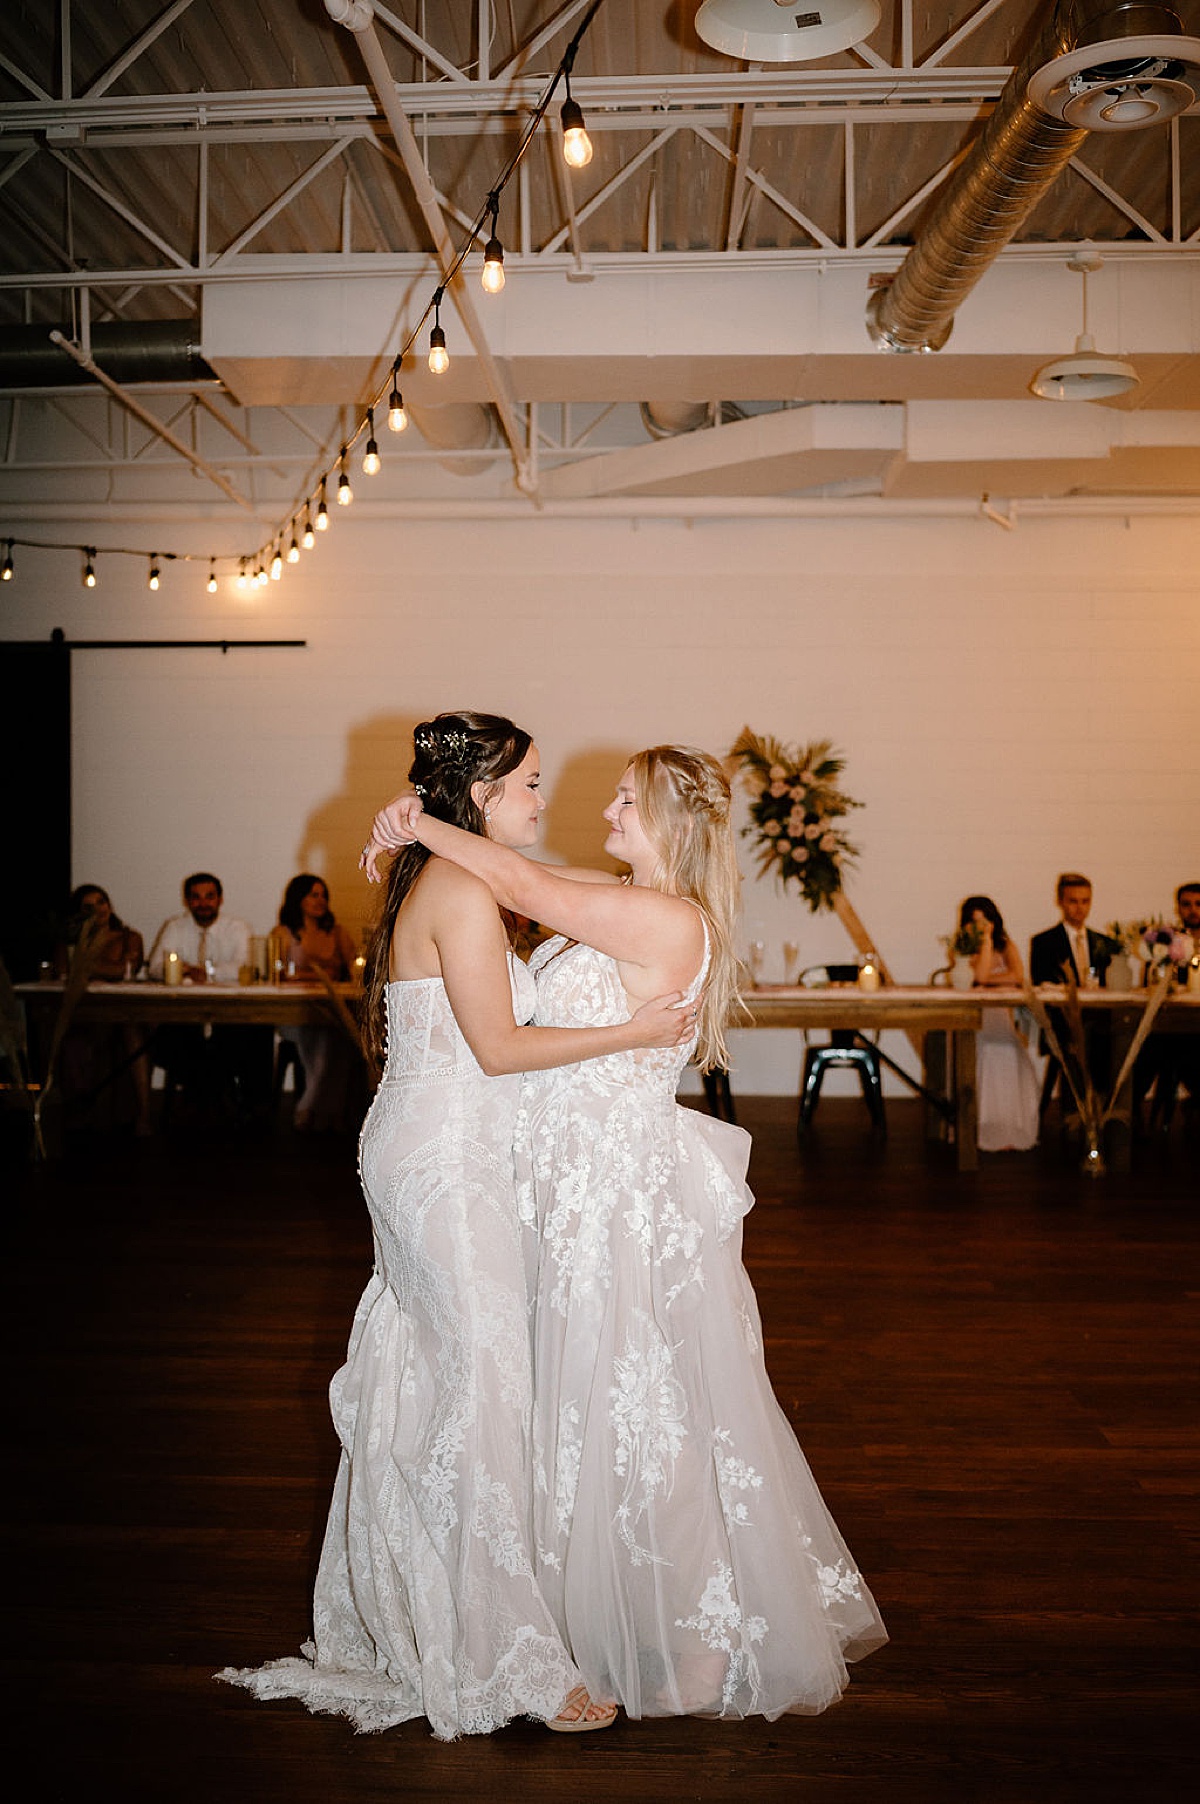 Two women share their first dance after beautiful Indianapolis wedding shot by Indigo Lace Collective